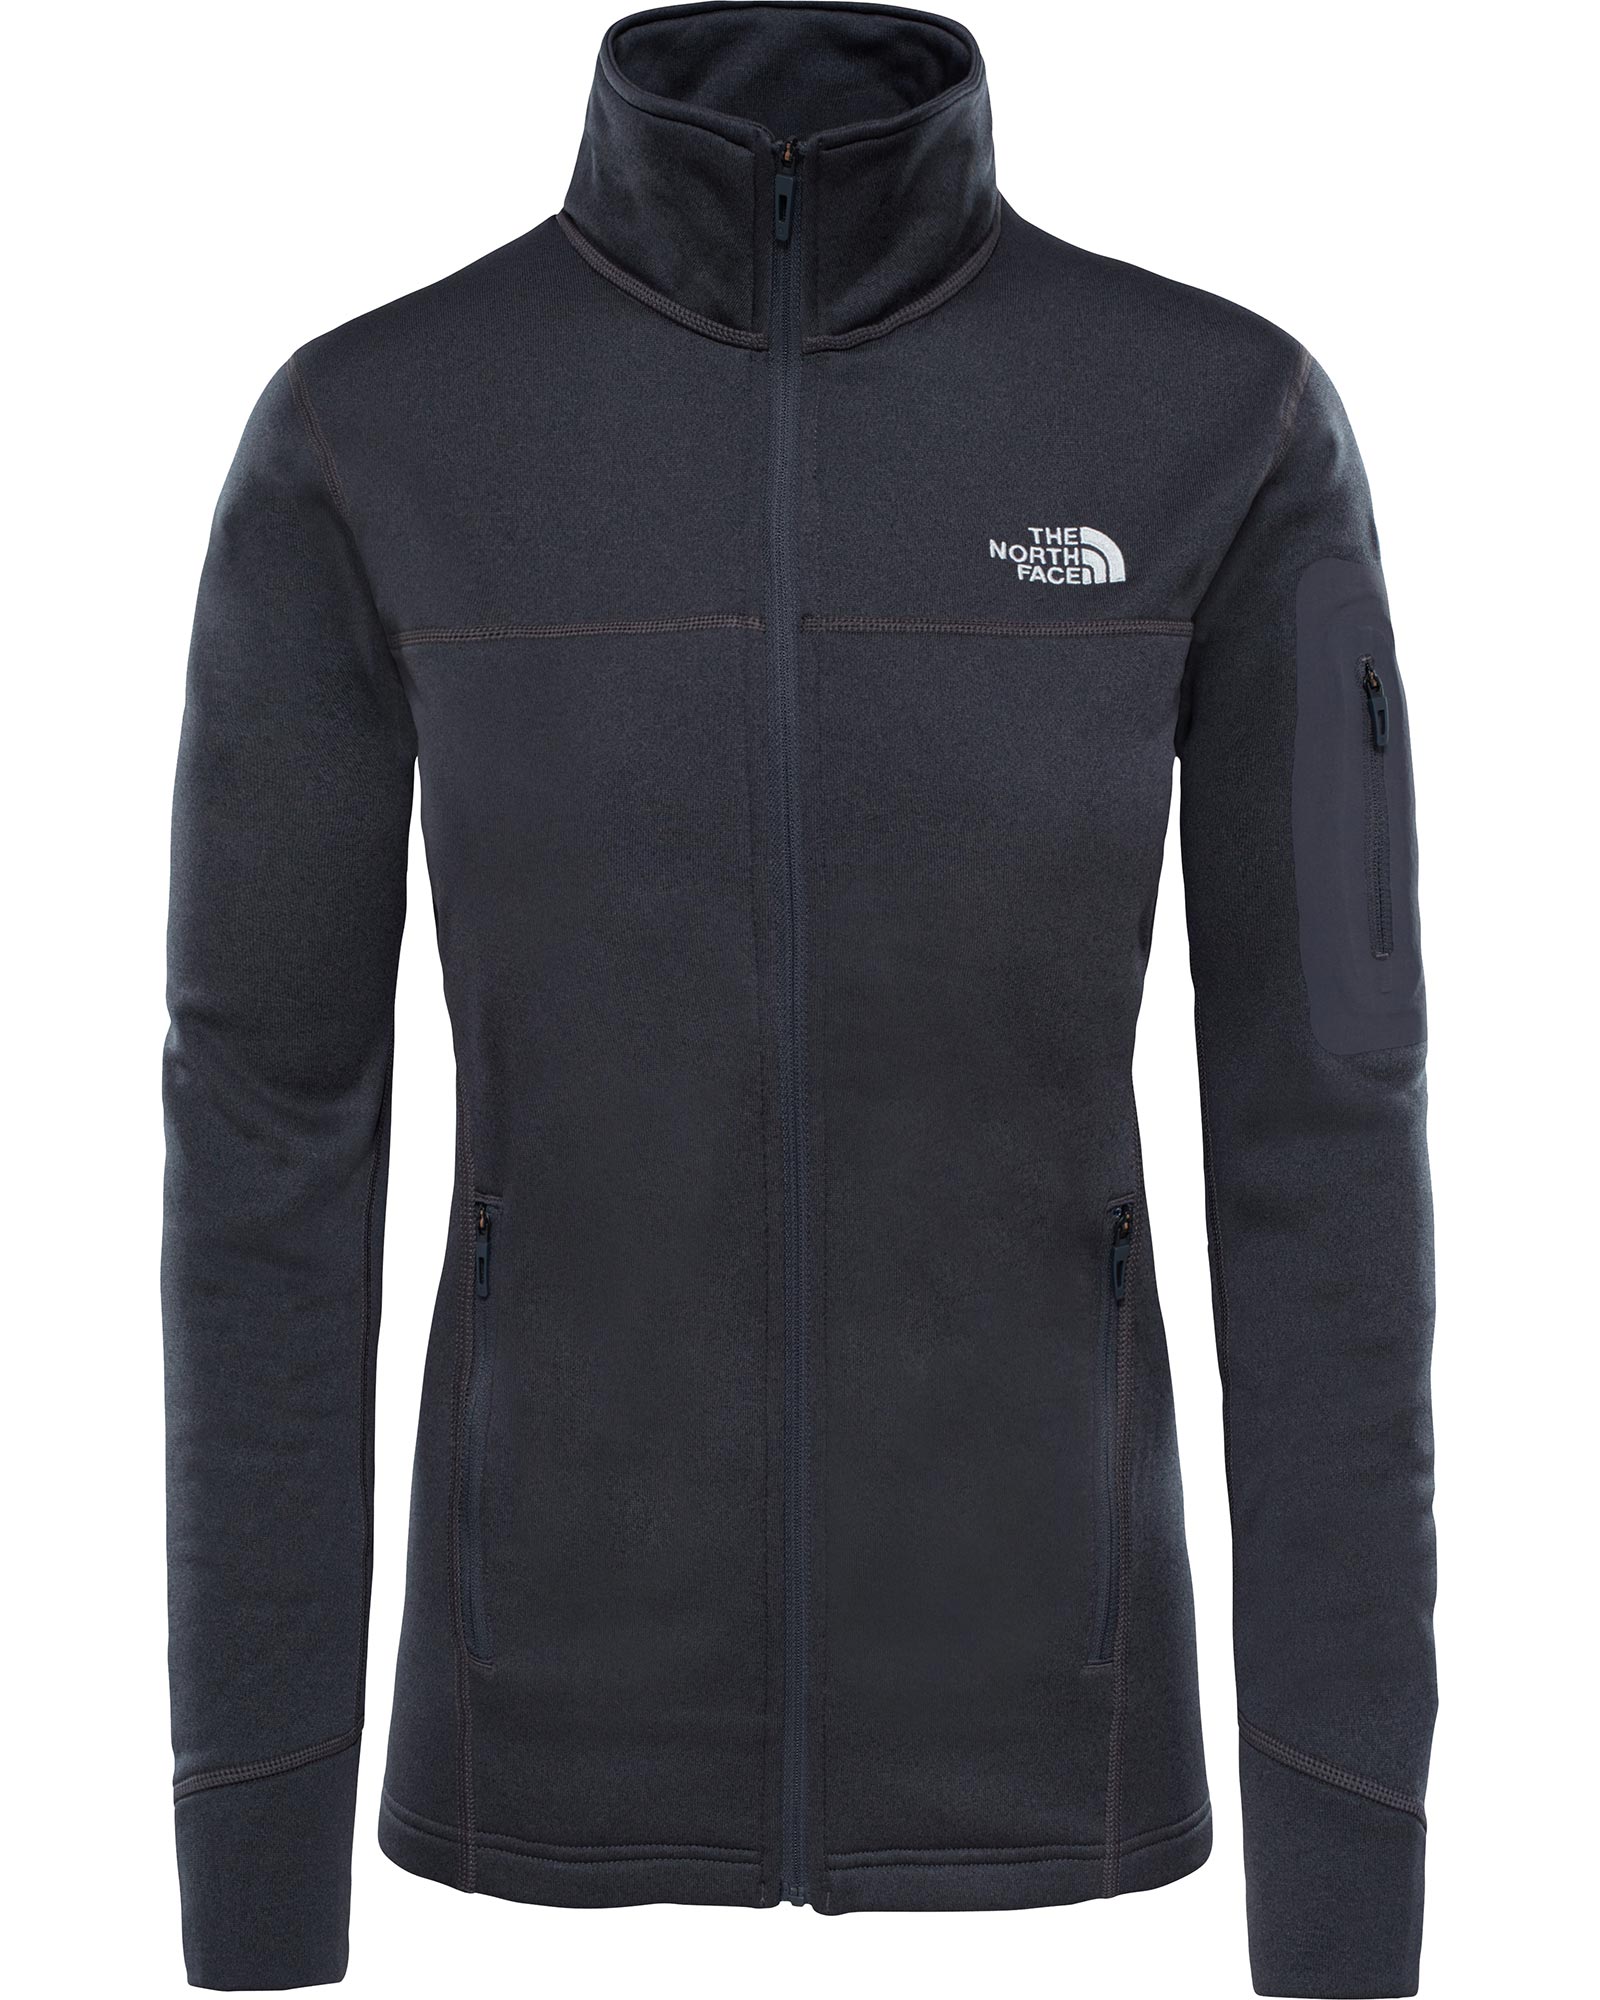 The North Face Kyoshi Womens Full Zip Jacket